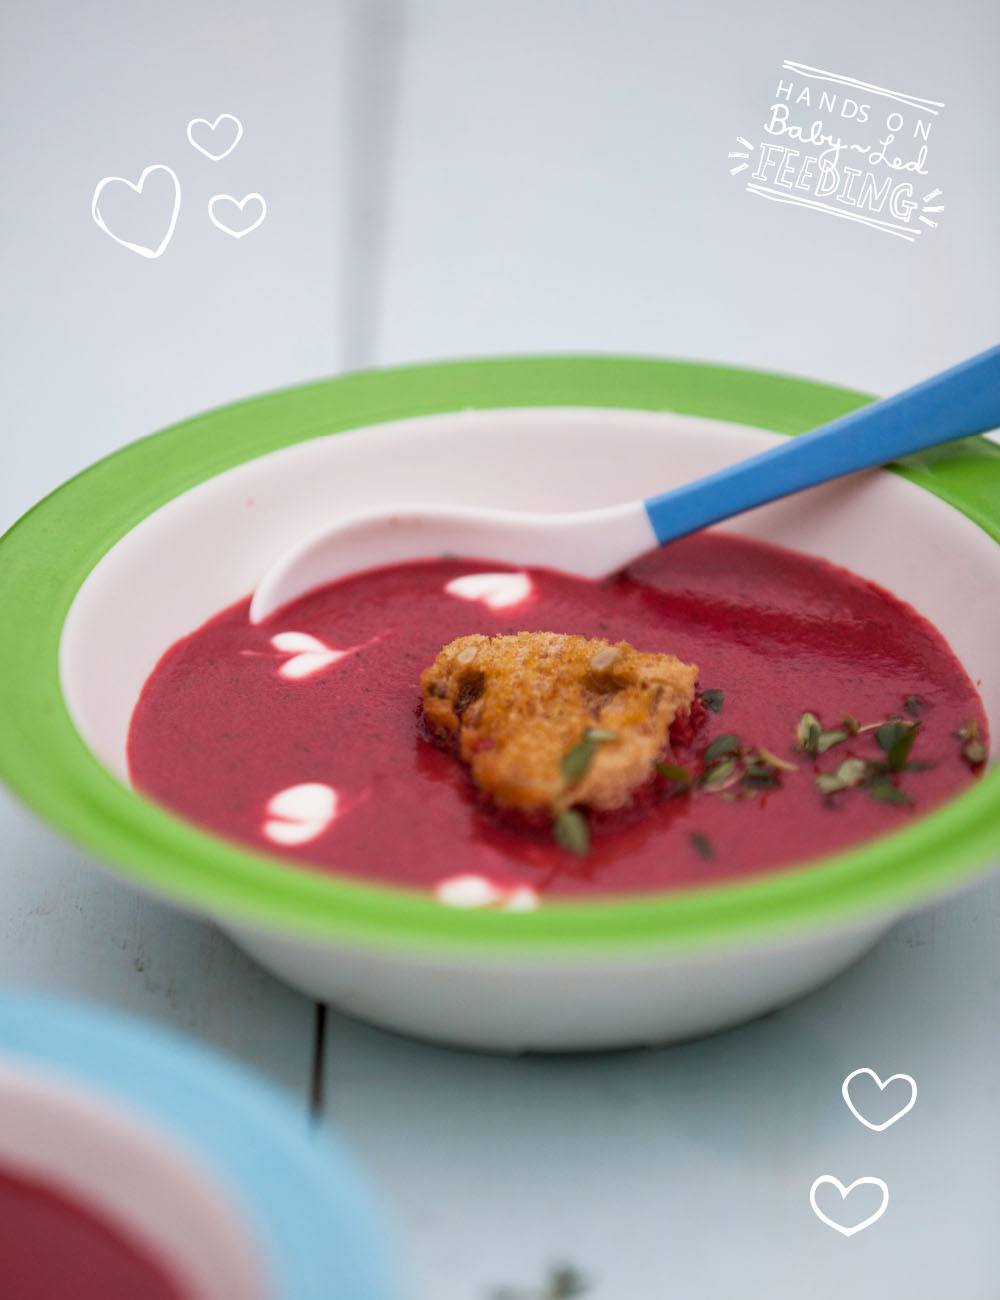 Easy and healthy beetroot and ginger soup for baby led weaning, toddlers, and parents alike. Made with colorful beetroot, flavorful fresh ginger, onion, hearty broccoli, nutty coconut milk, served with fresh yogurt and thyme. #beetroot #soup #souprecipe #valentinesdayideas #valentines #babyledweaning #babyledfeeding #soupinspiration 